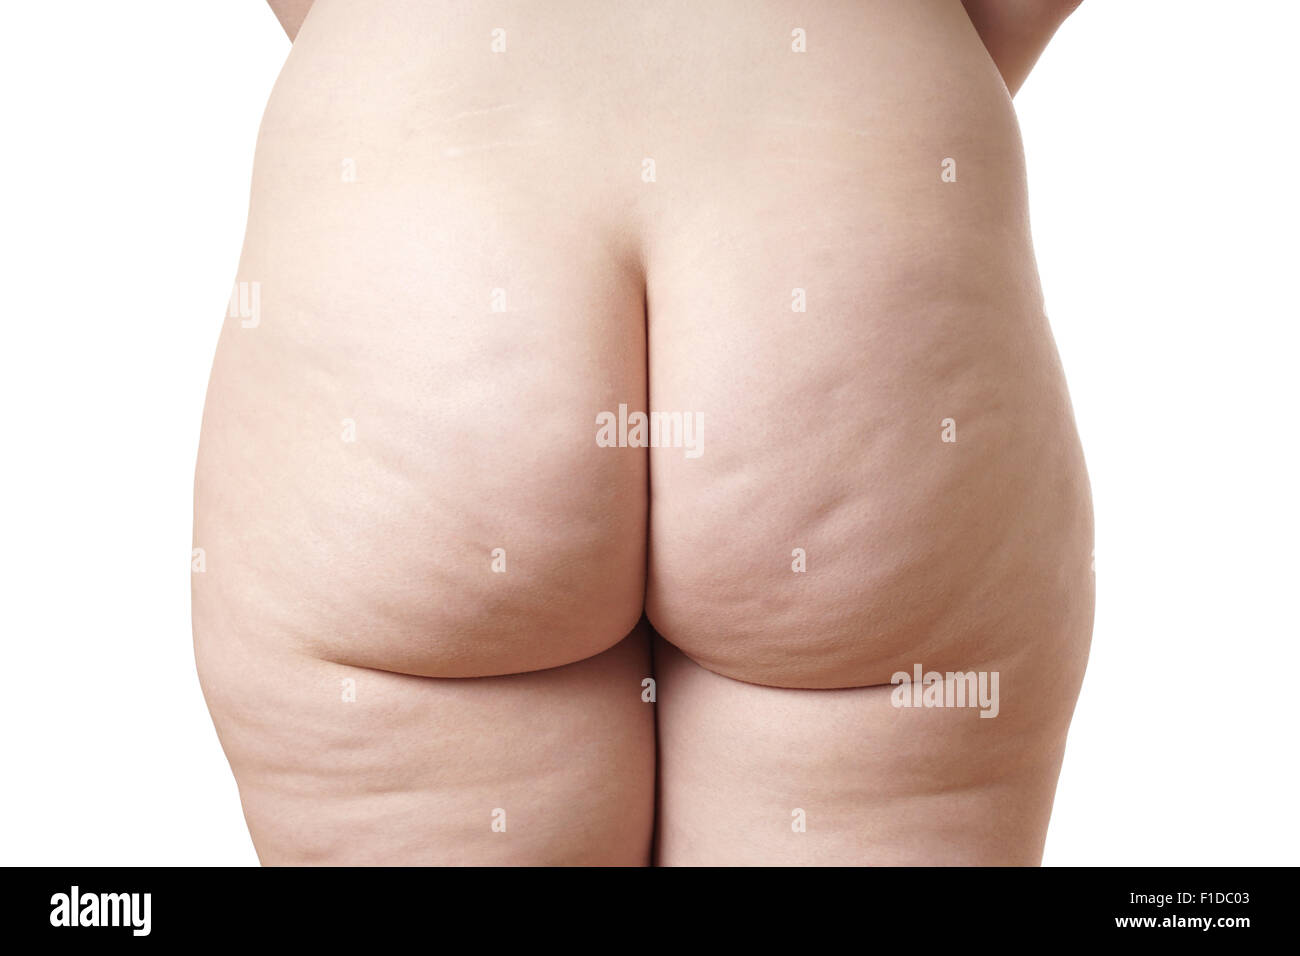 female bottom with cellulite Stock Photo